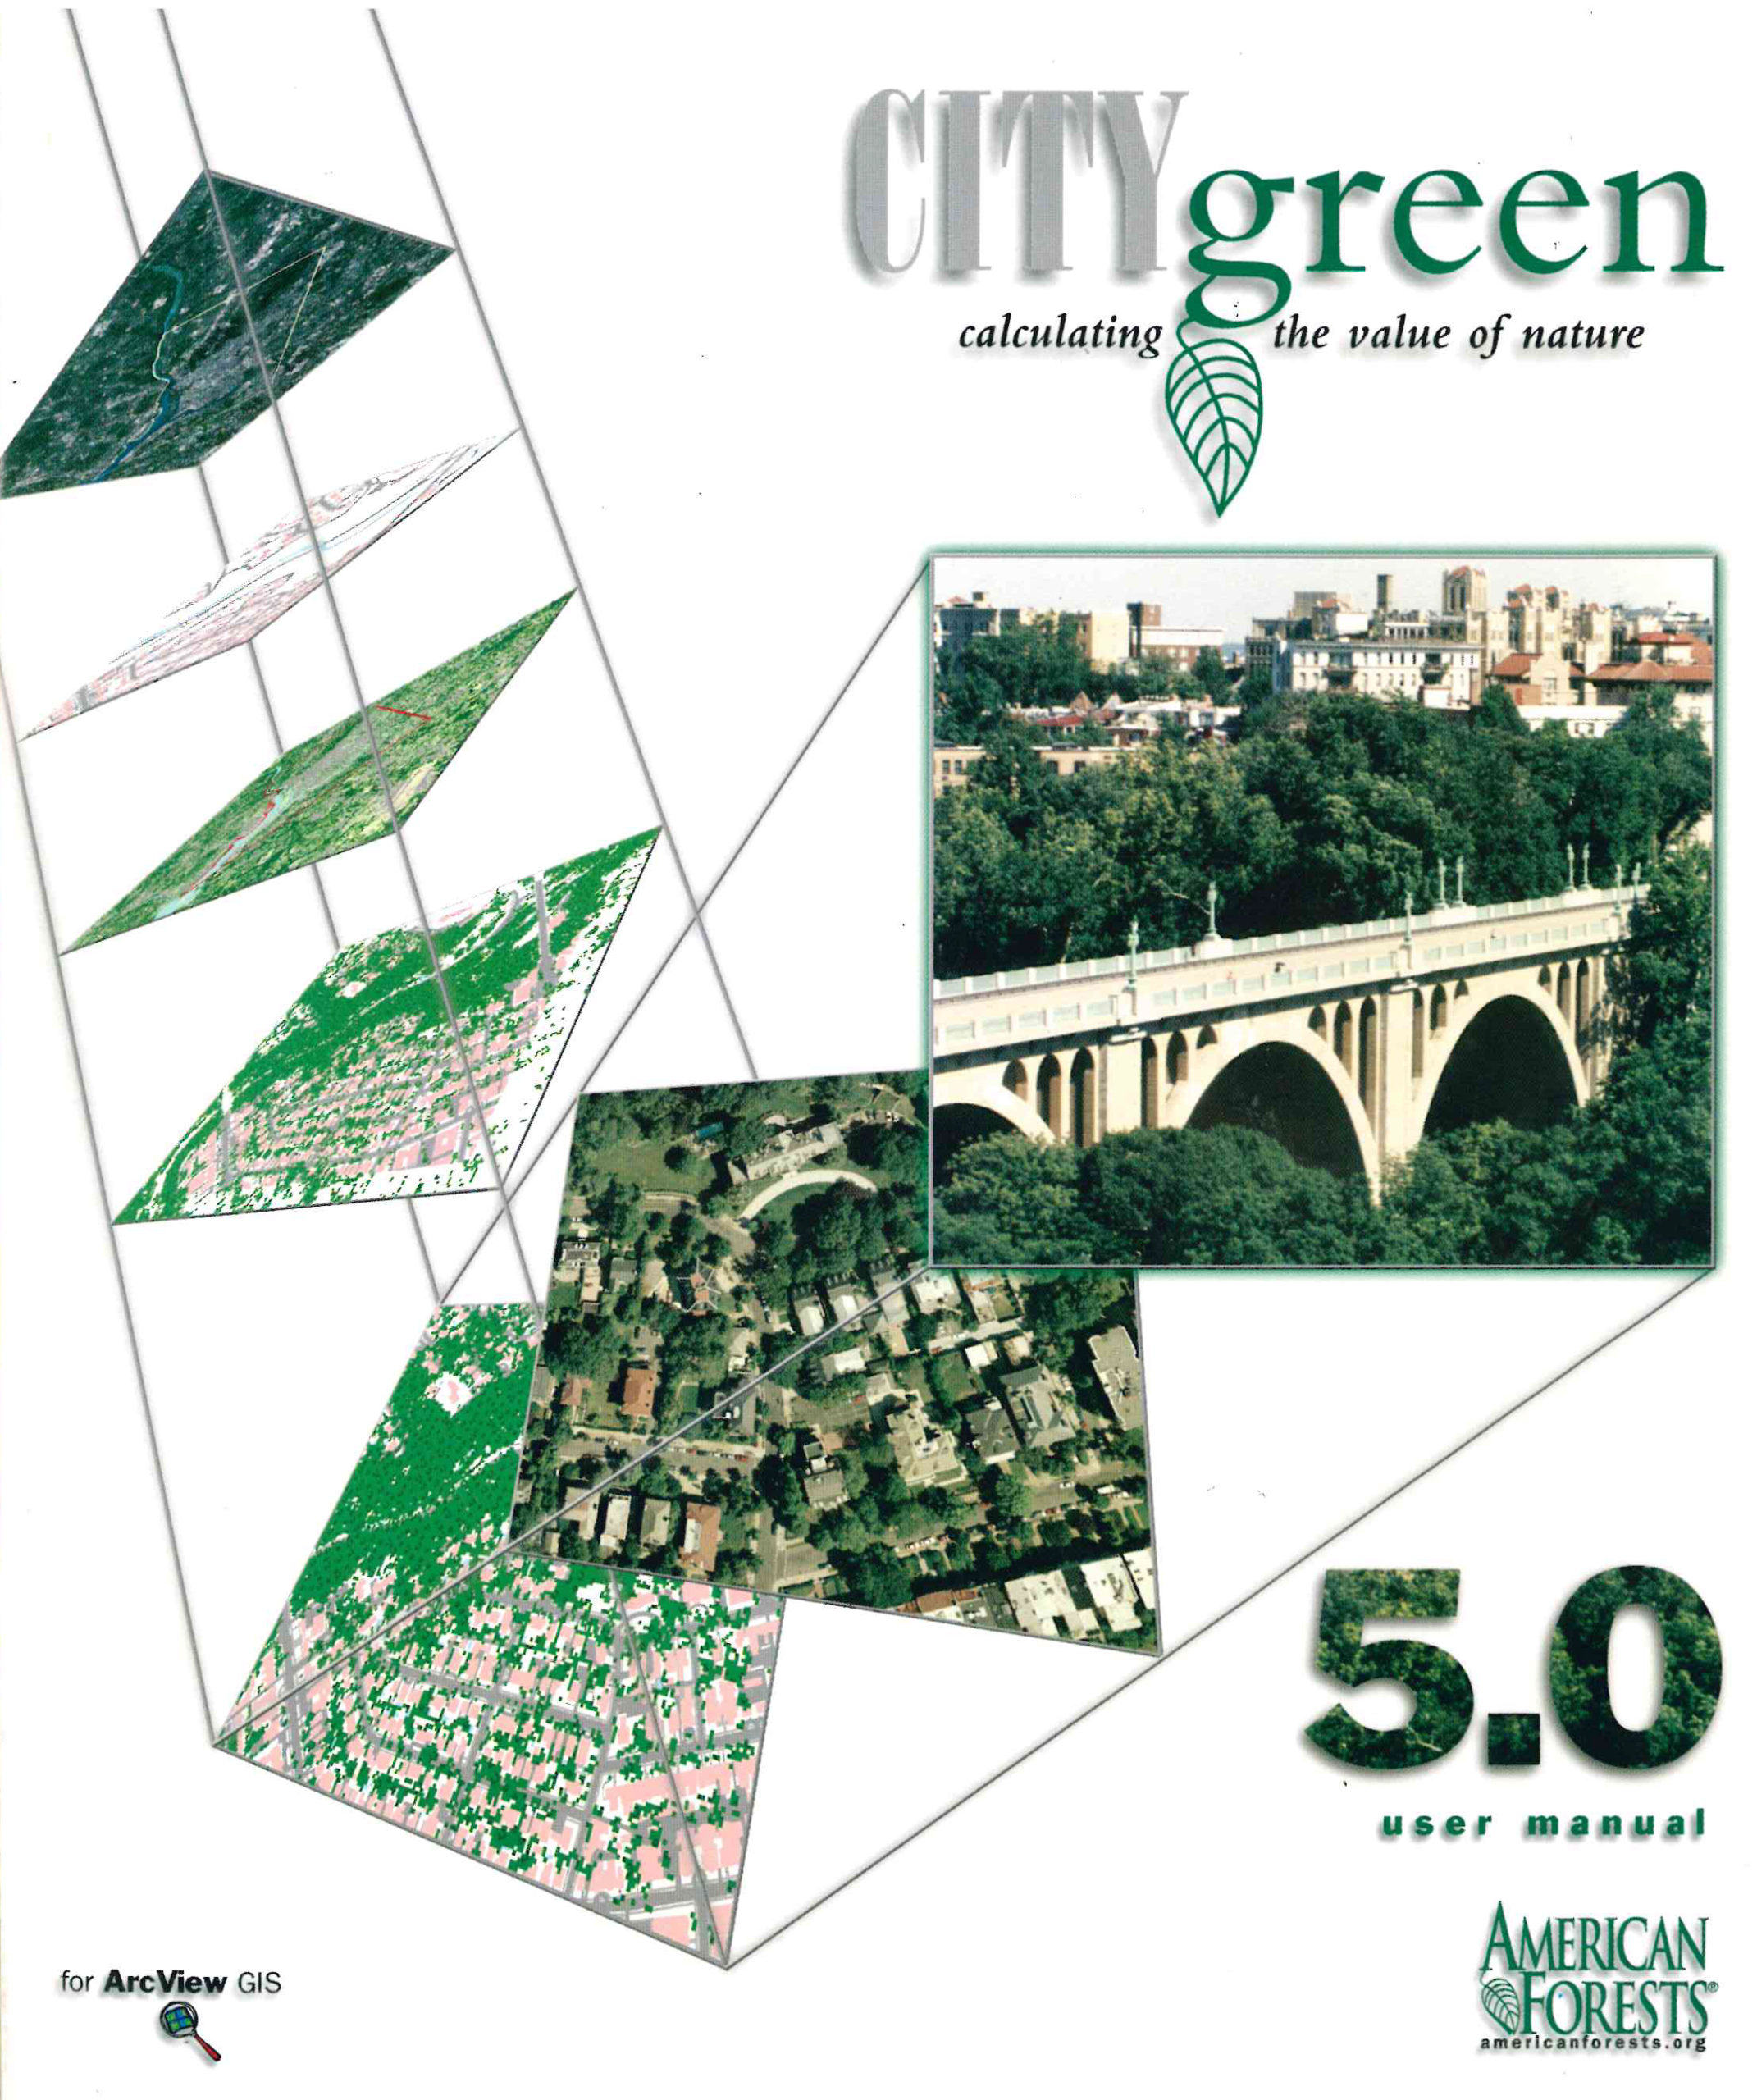 In 1996, American Forests released CITYgreen, a software planning tool for mapping urban ecosystems and calculating their value. This later was developed into the more known i-Tree GIS program used today.